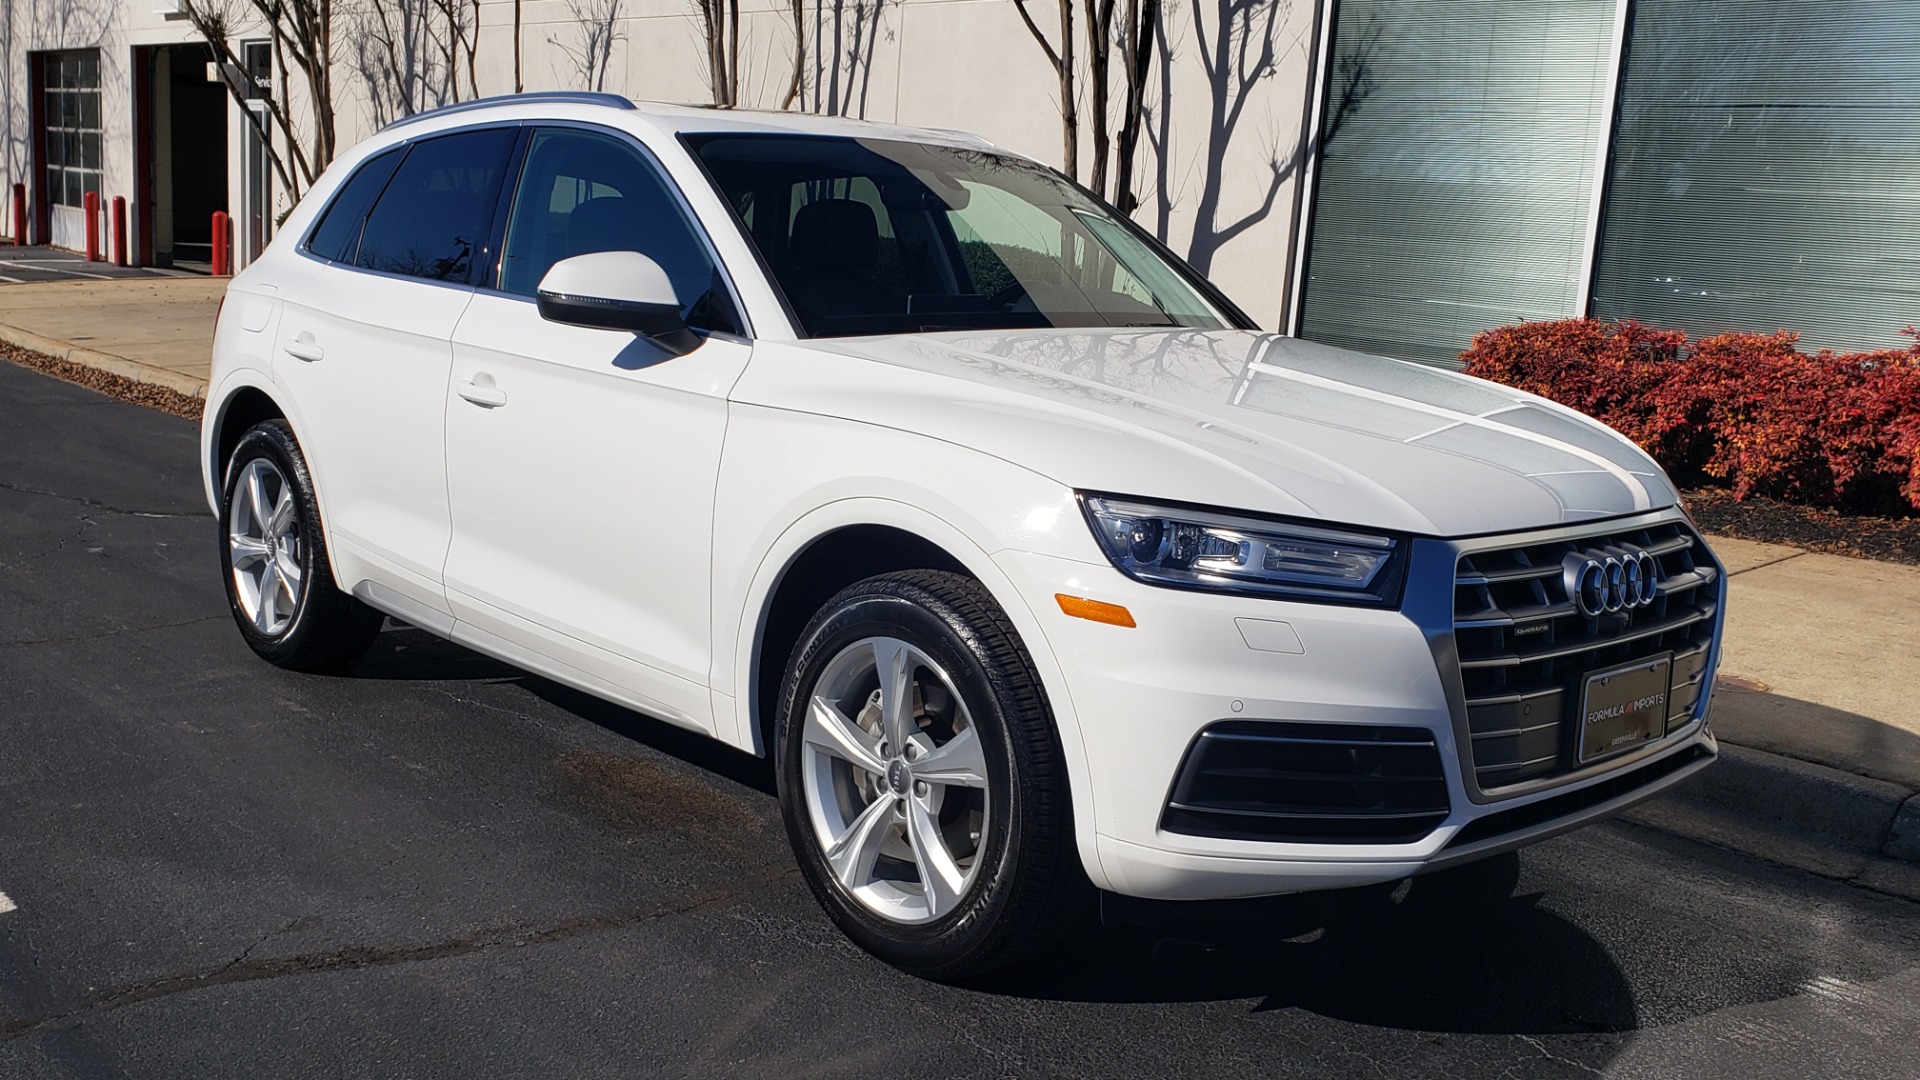 Used 2019 Audi Q5 PREMIUM PLUS 2.0L / AWD / NAV / PANO-ROOF / DRVR ASST / REARVIEW for sale $38,795 at Formula Imports in Charlotte NC 28227 5